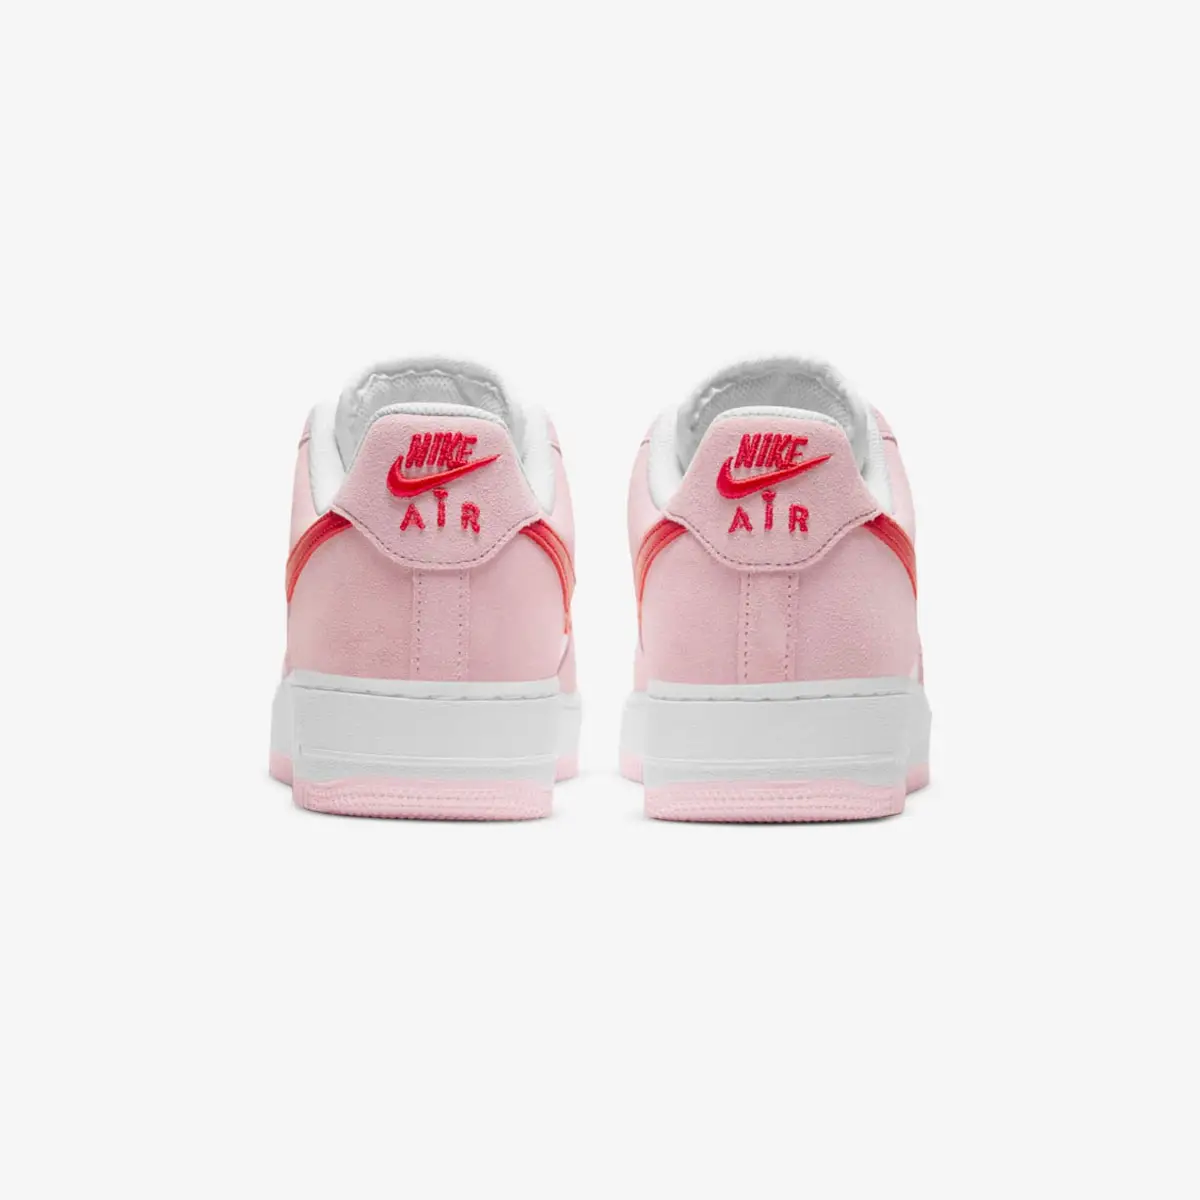 Nike valentines day sneakers air force 1